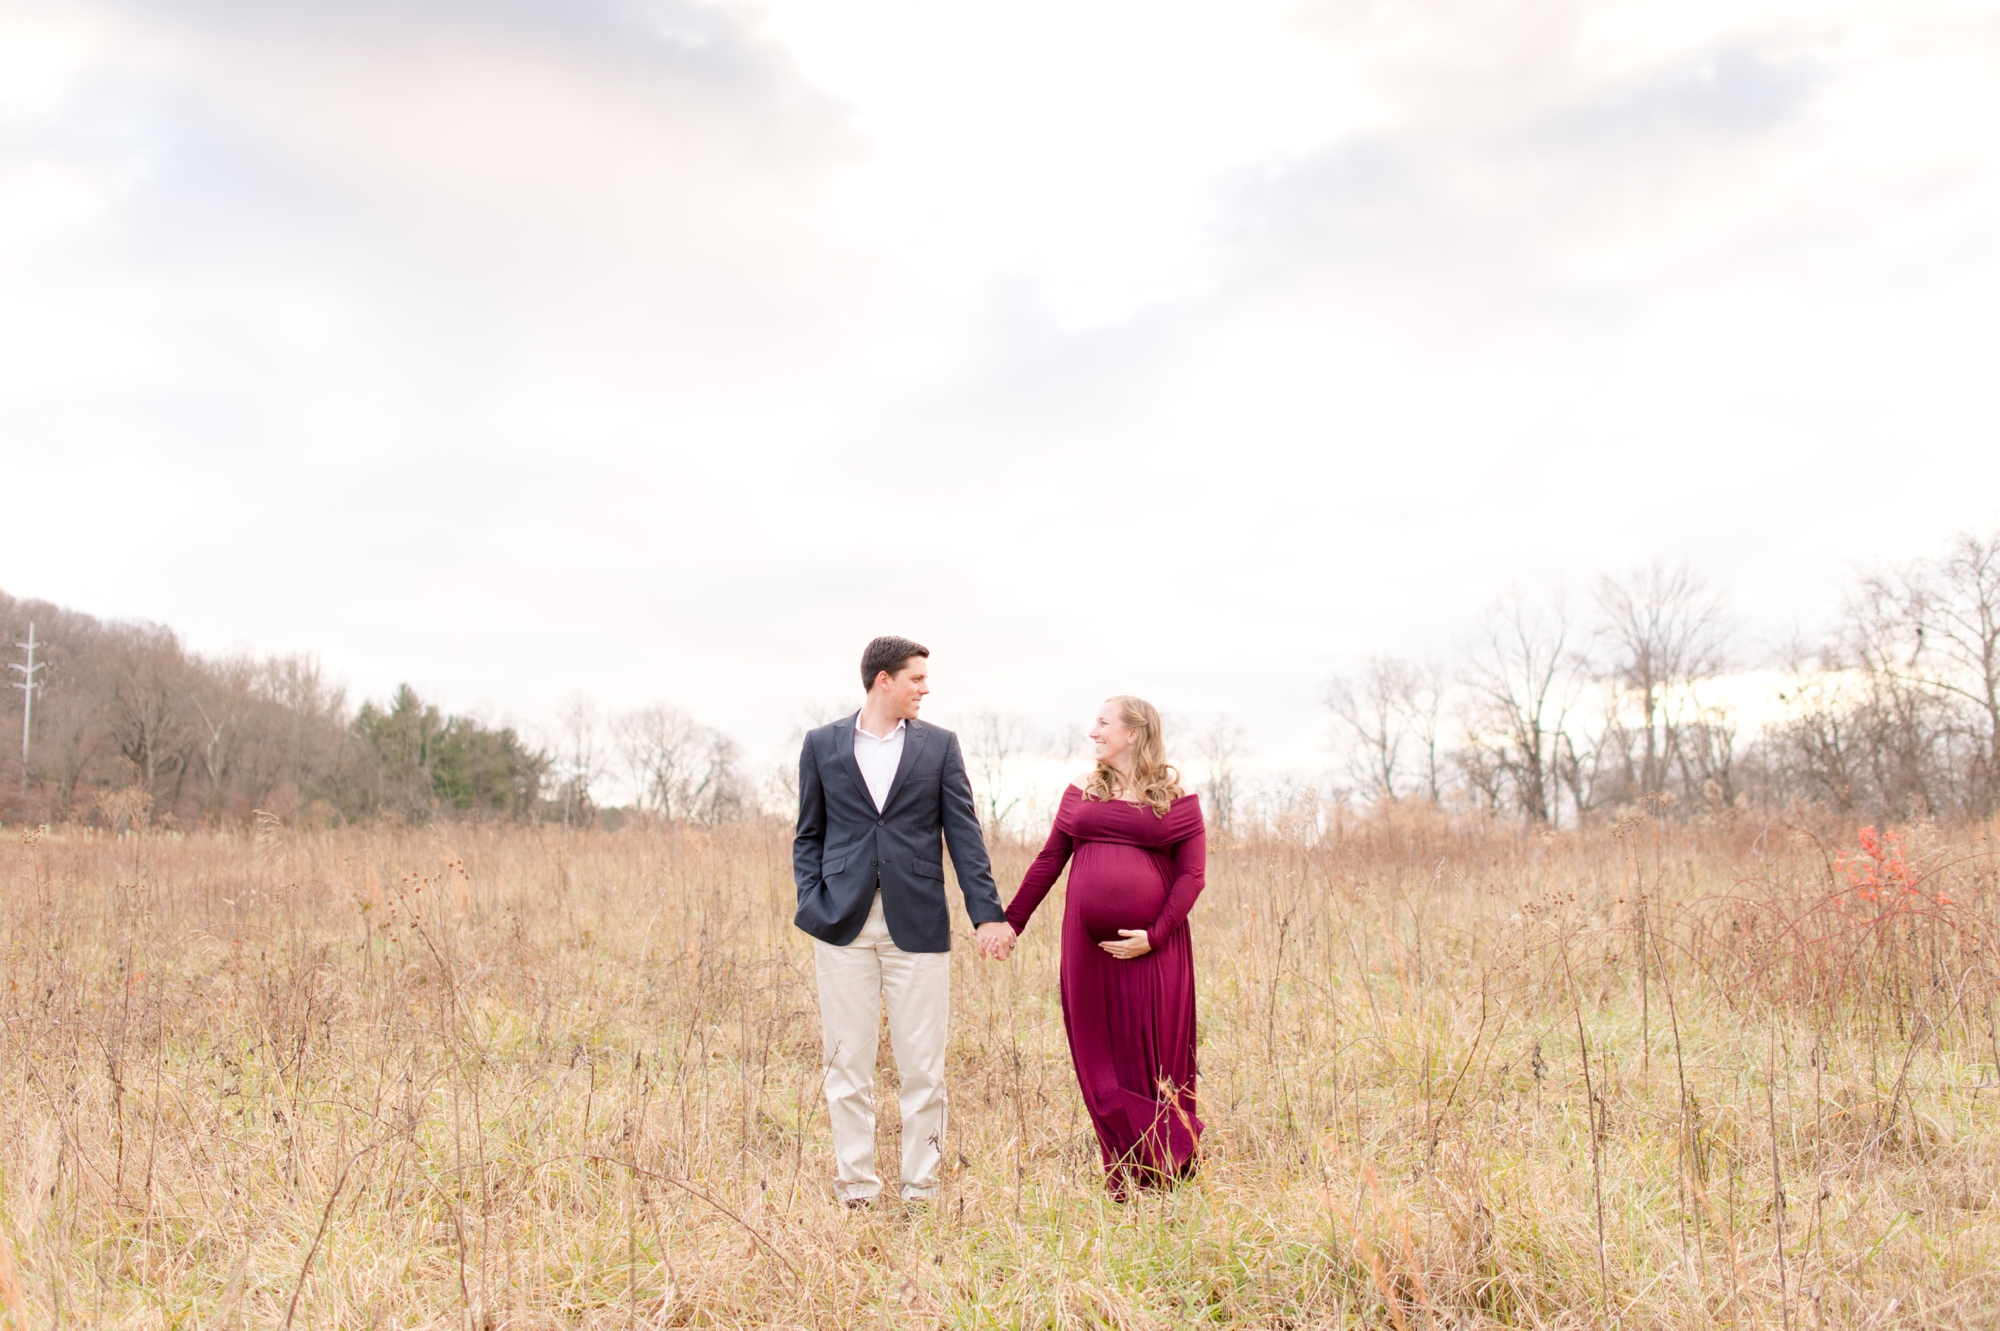 AG and Kevin Maternity-275_anna grace photography baltimore maryland maternity photographer cromwell valley park photo.jpg